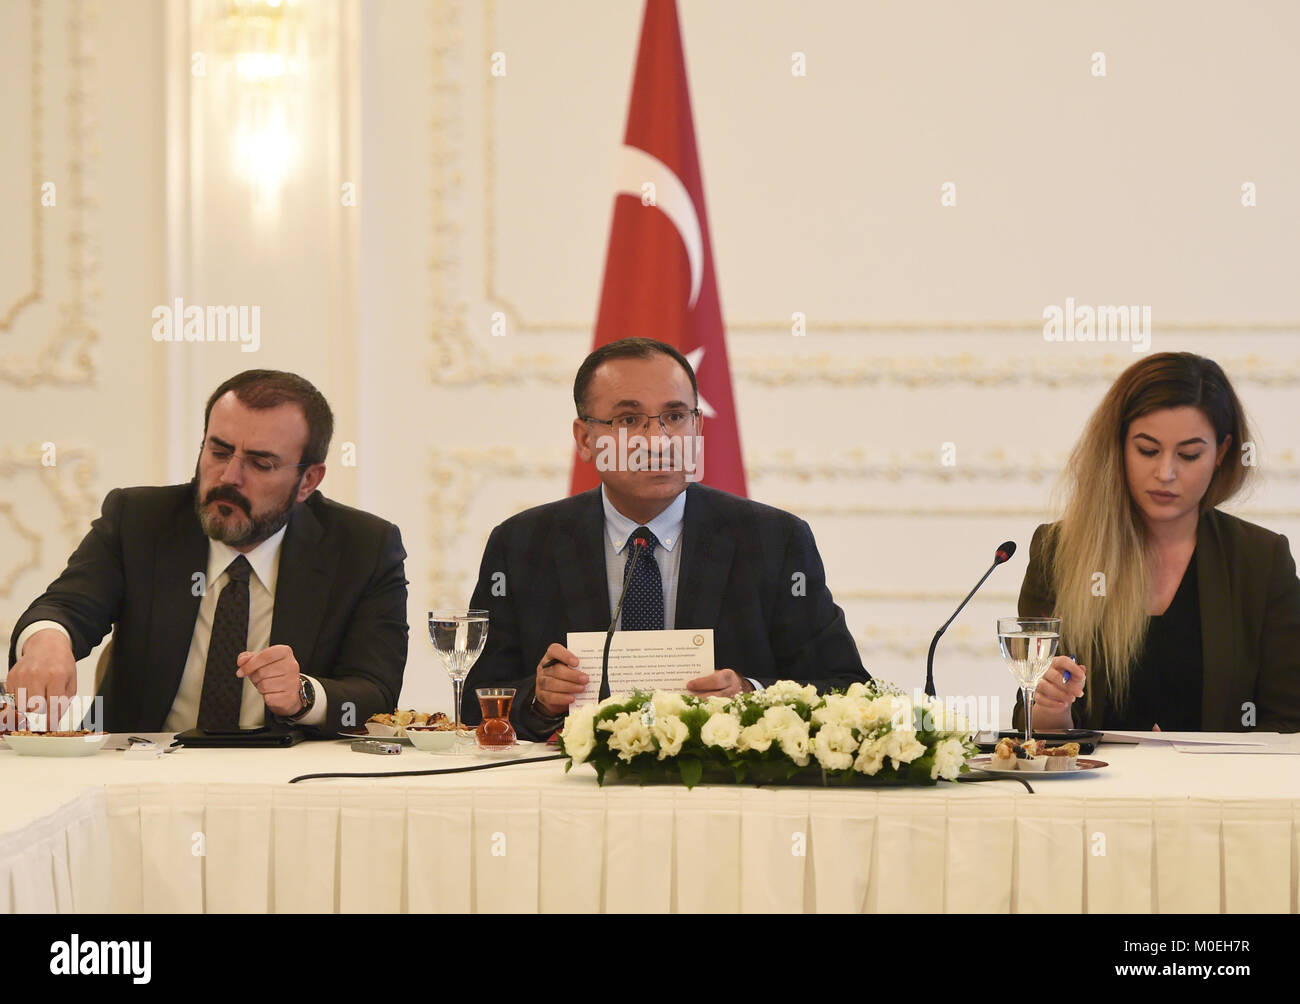 Istanbul, Turkey. 21st Jan, 2018. Turkish Deputy Prime Minister Bekir Bozdag (C) answers a question at a press conference in Istanbul, Turkey, on Jan. 21, 2018. Turkish President Recep Tayyip Erdogan on Sunday voiced hope for the ongoing military operation against Kurdish militia in Syria's Afrin to end 'in a very short time.' Turkish Deputy Prime Minister Bekir Bozdag said the operation will continue until 'all the terror elements are removed,' which he said include the PKK, YPG and the Islamic State. Credit: He Canling/Xinhua/Alamy Live News Stock Photo